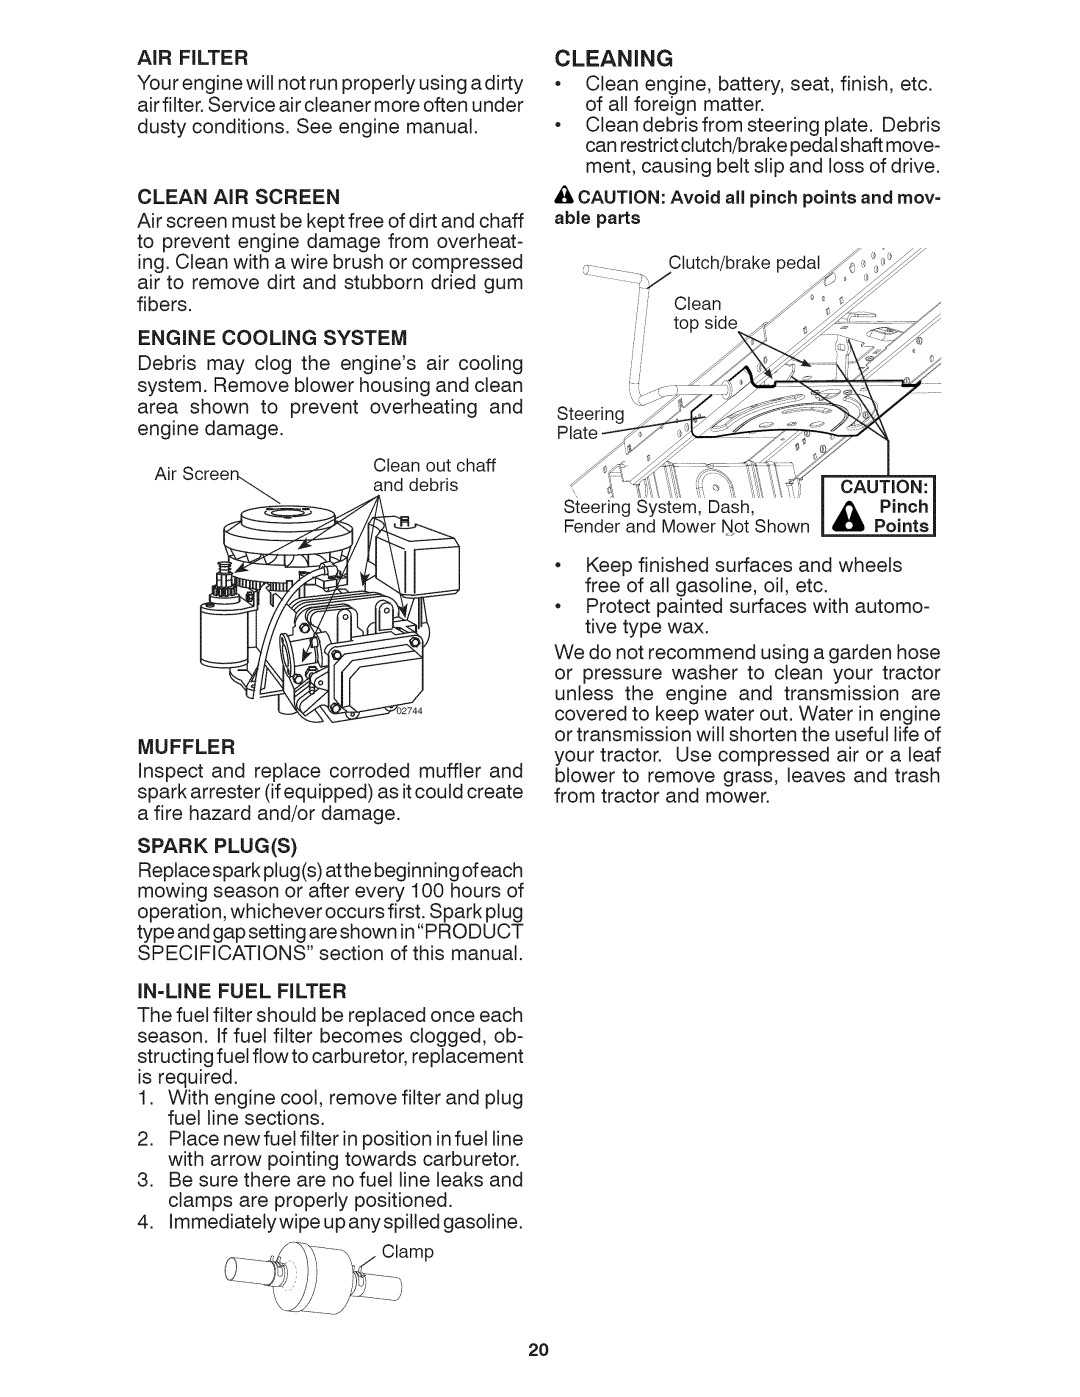 Craftsman 917.28035 owner manual iC UTO, Cleaning, Engine Cooling System, Muffler 